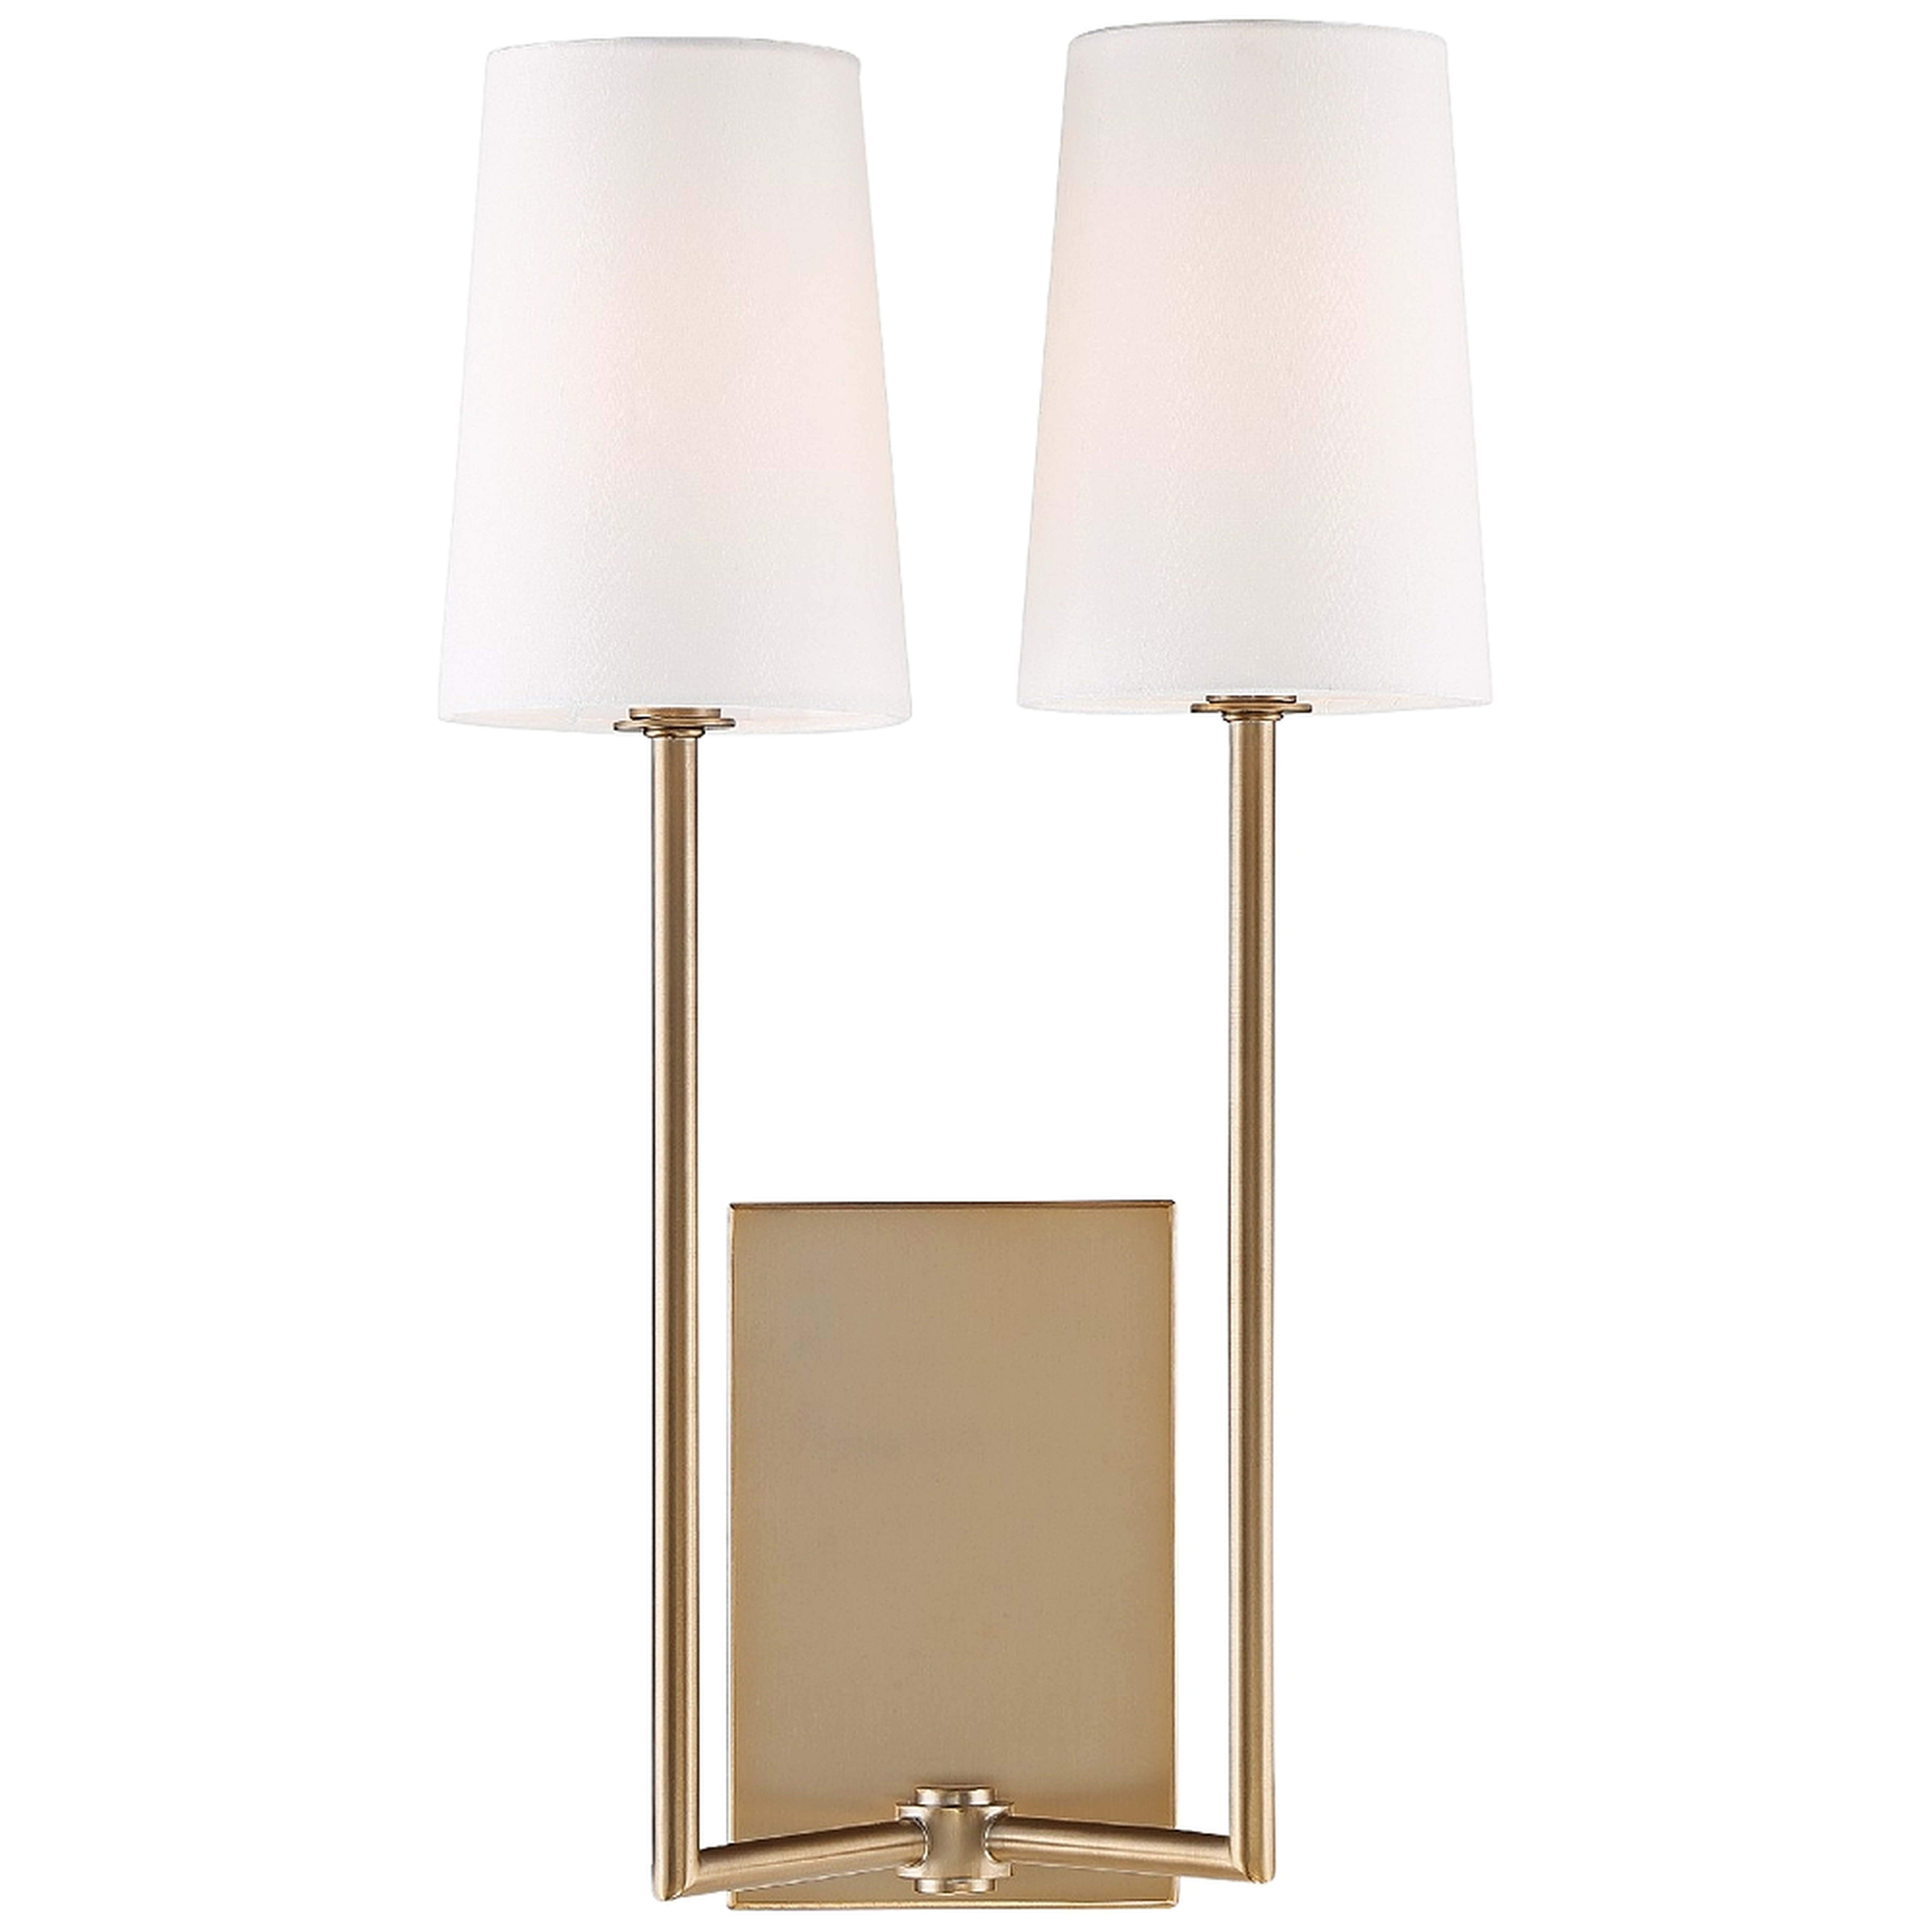 Crystorama Lena 18" High 2-Light Vibrant Gold Wall Sconce - Style # 84W70 - Lamps Plus